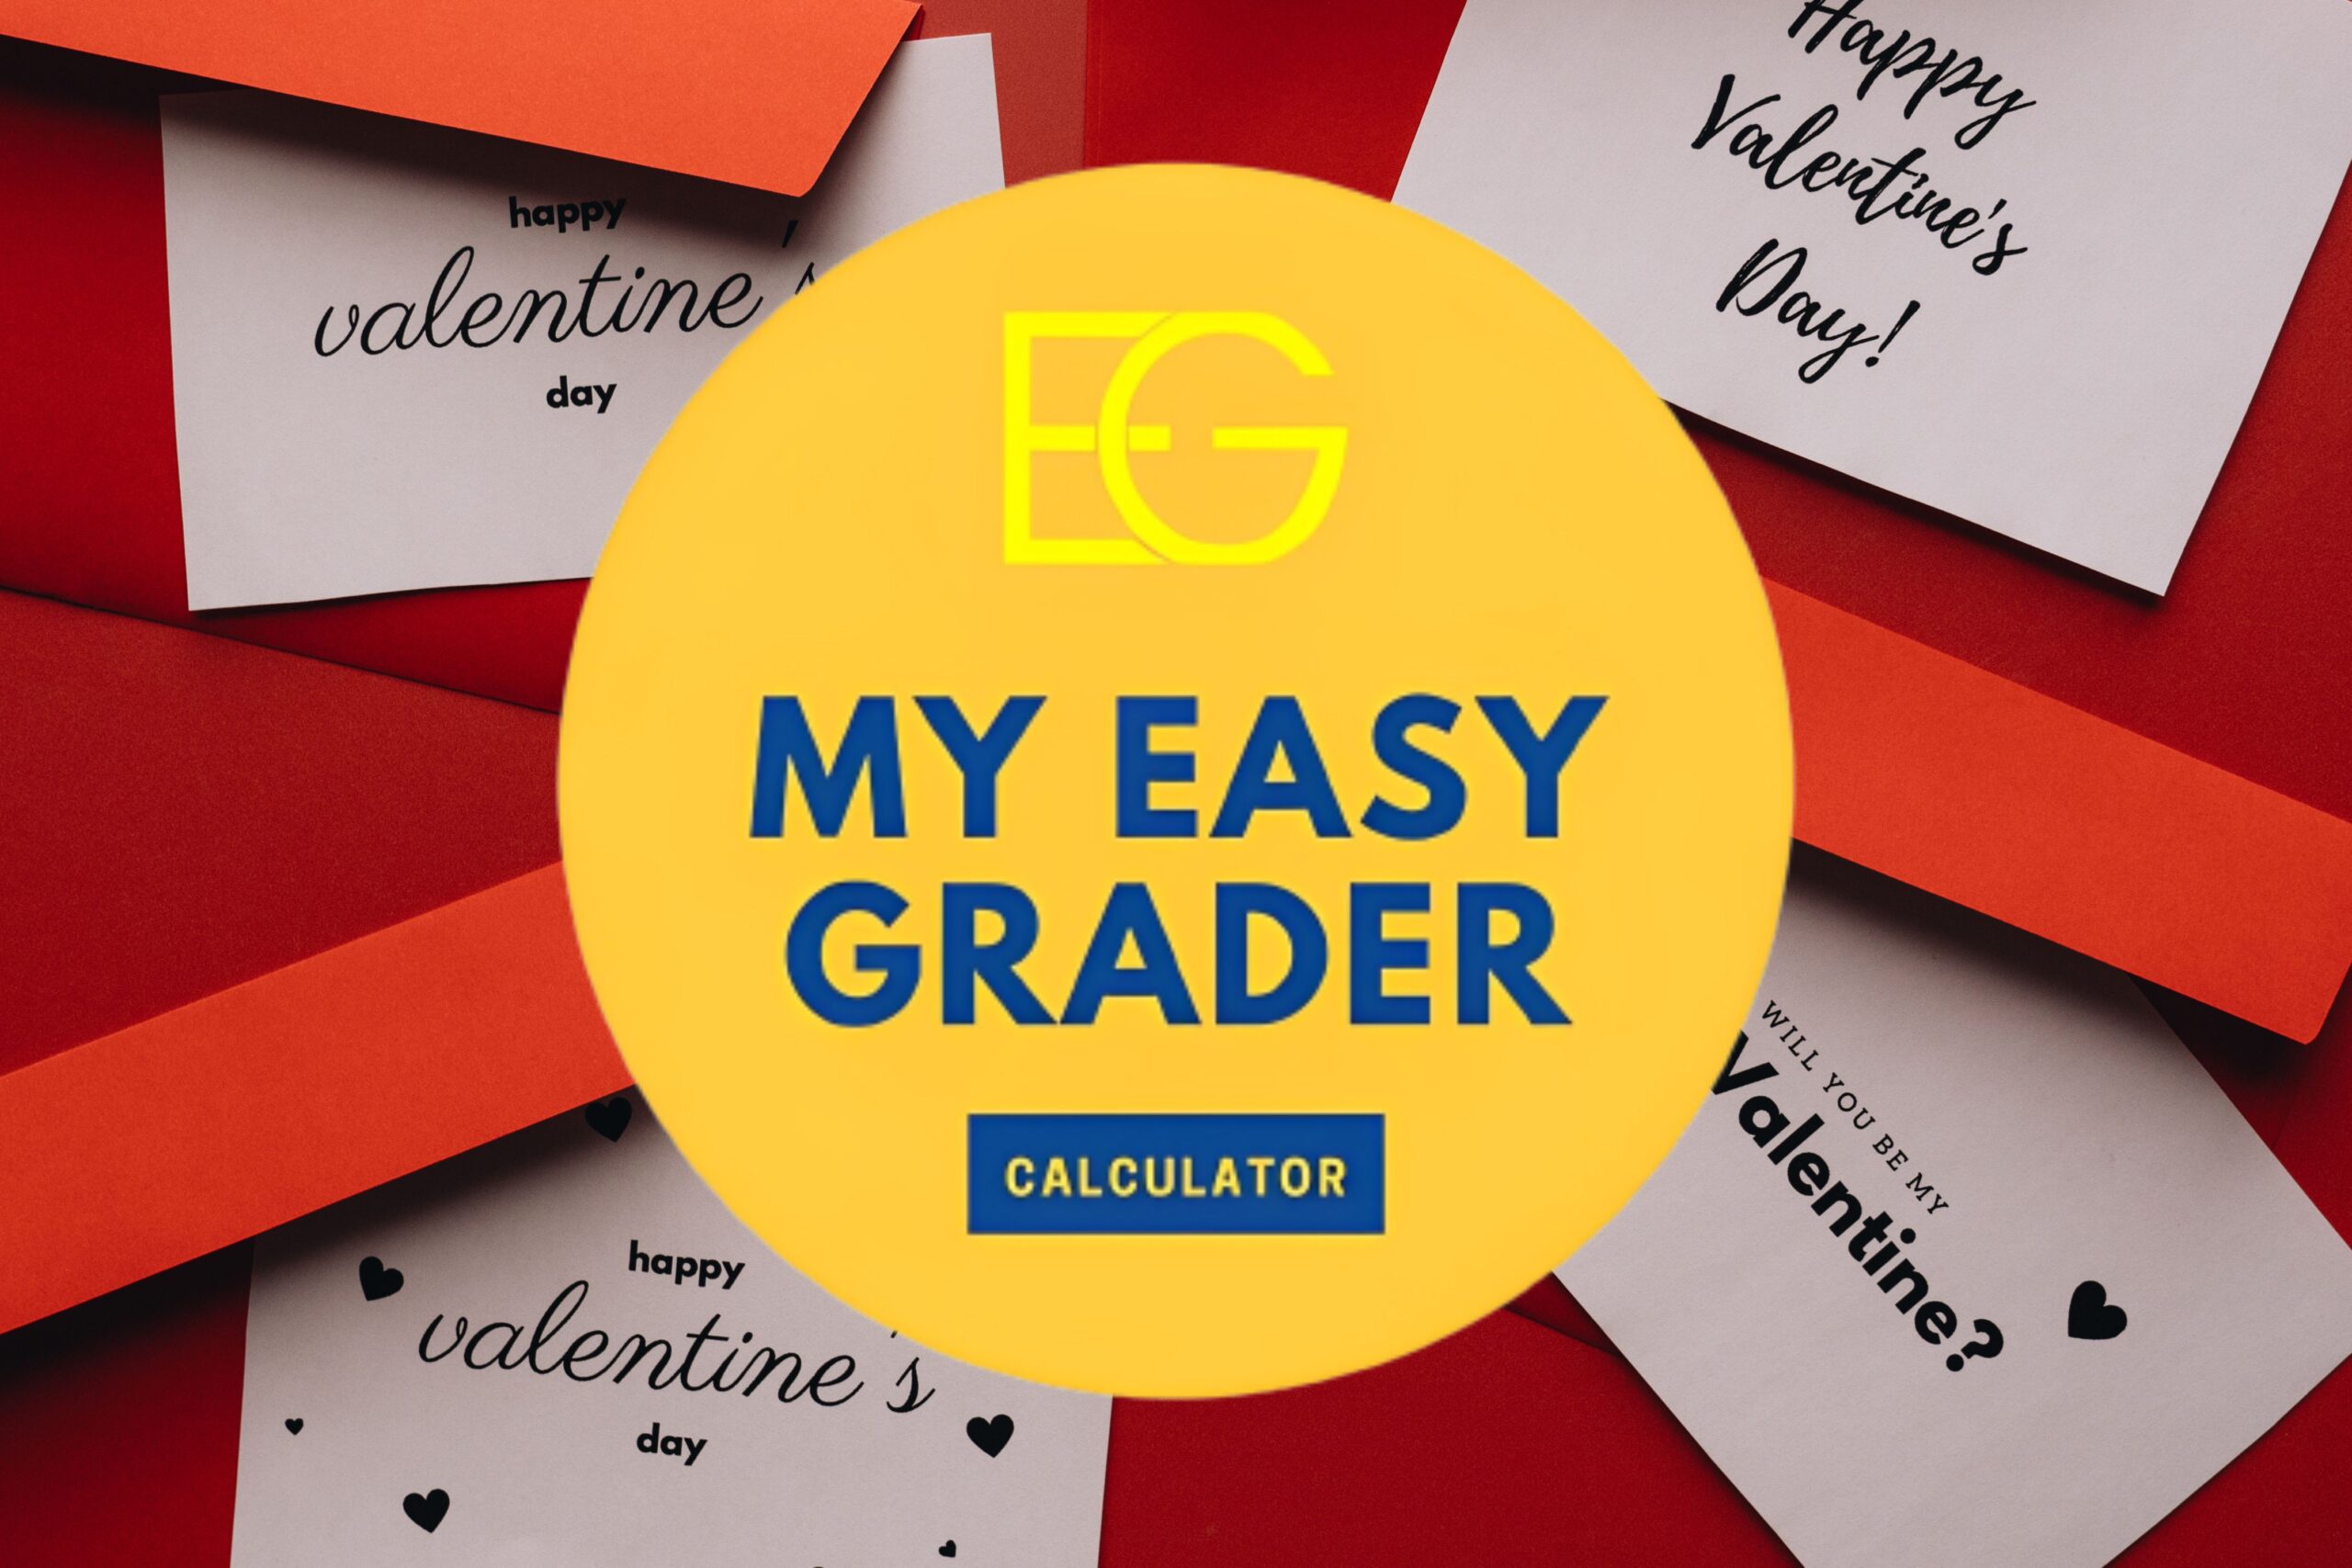 My Easy Grader for Valentines Day